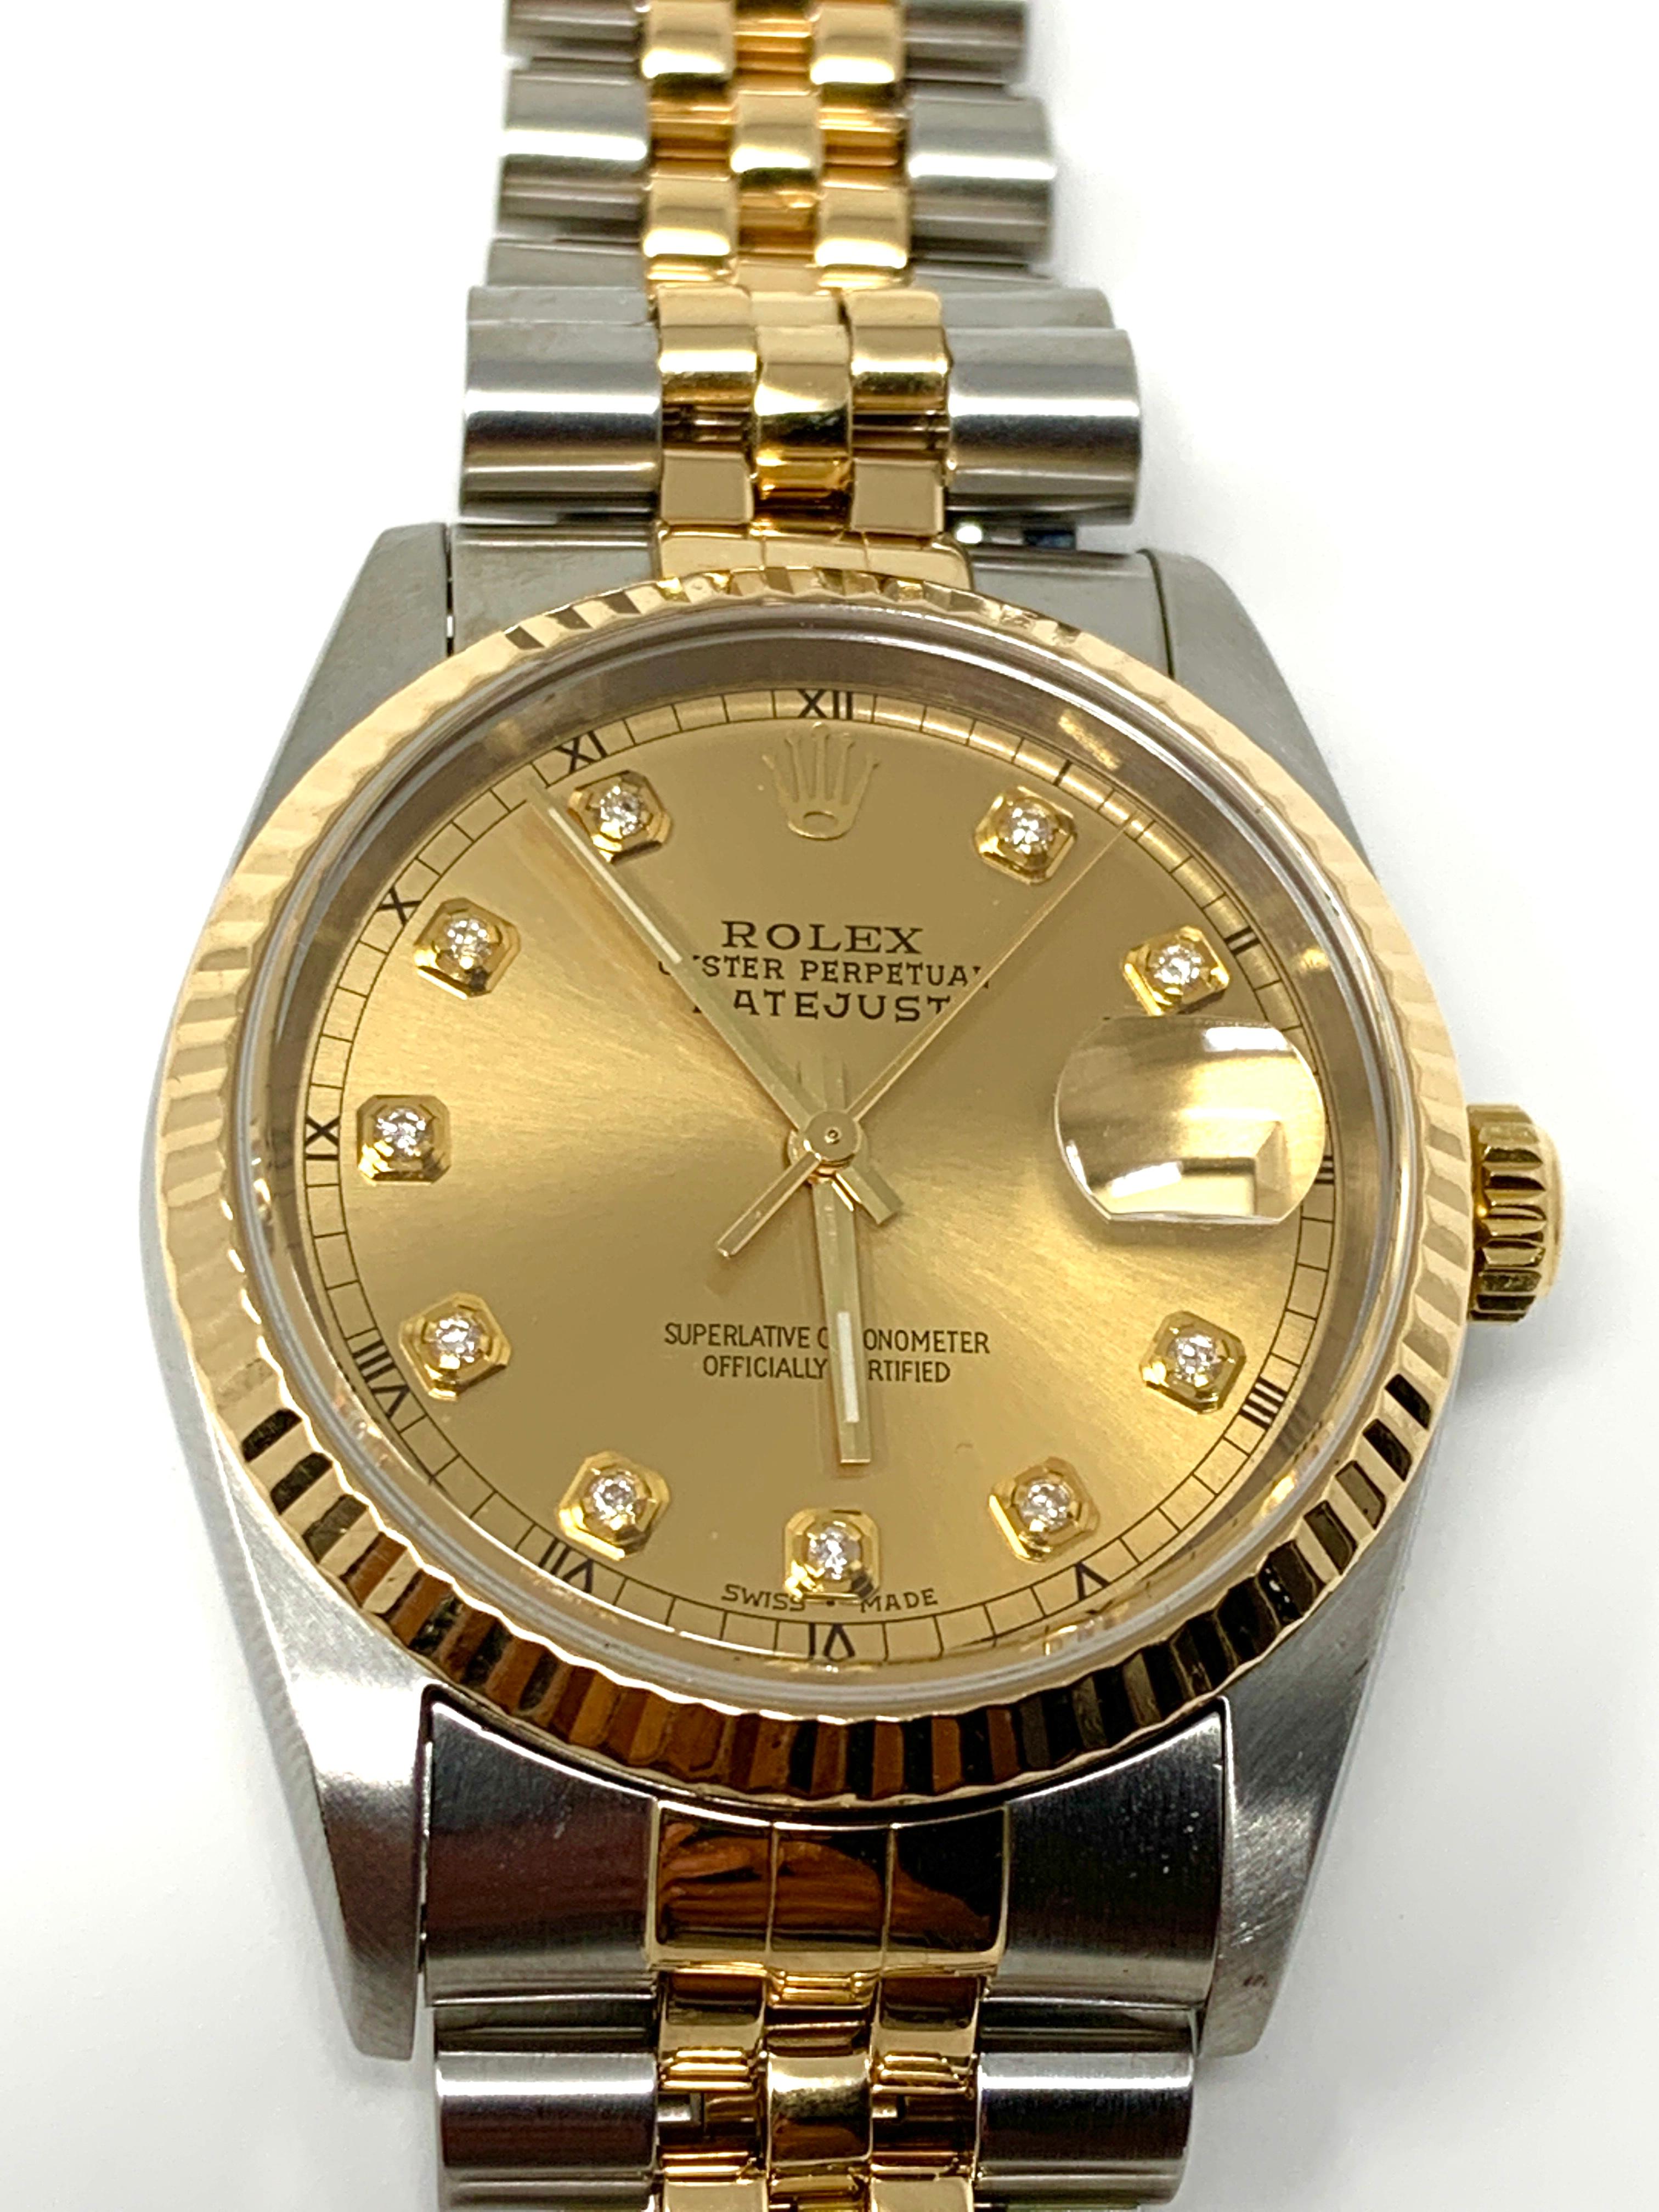 (Watch Description)
Brand - Rolex 
Gender - Unisex
Metals - Yellow Gold / Steel 
Model - Datejust 16233
Case size - 36mm
Dial - champagne diamond
Bezel - Yellow Gold Fluted 
Crystal - Sapphire
Movement - Automatic Cal-3135
Wrist size - 7 1/2 Inches